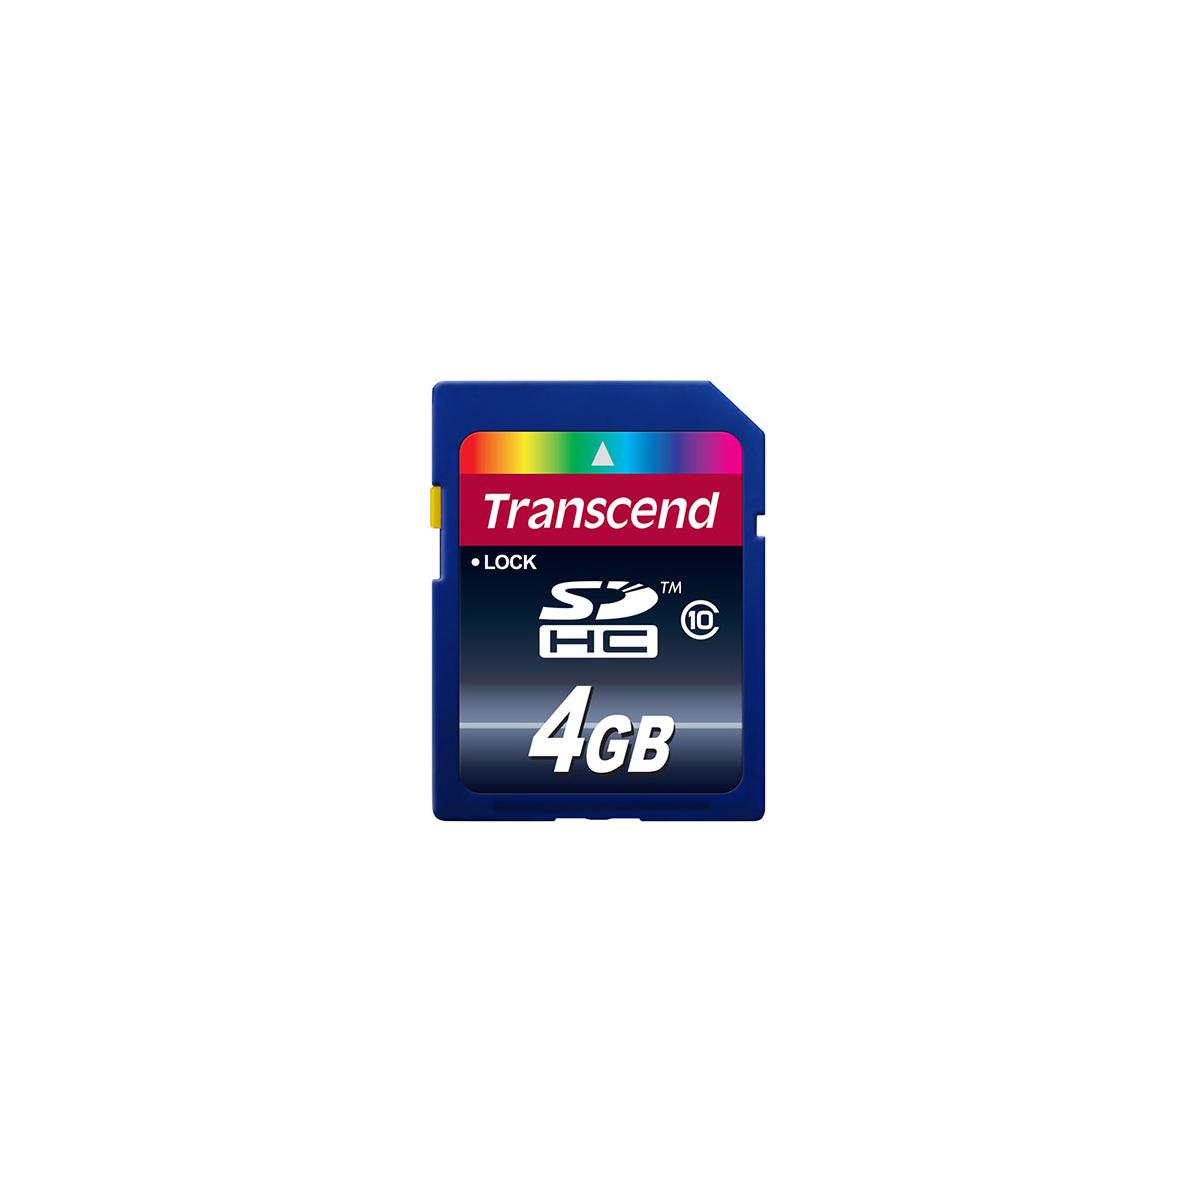 Image of Transcend 4GB Class 10 SDHC Memory Card